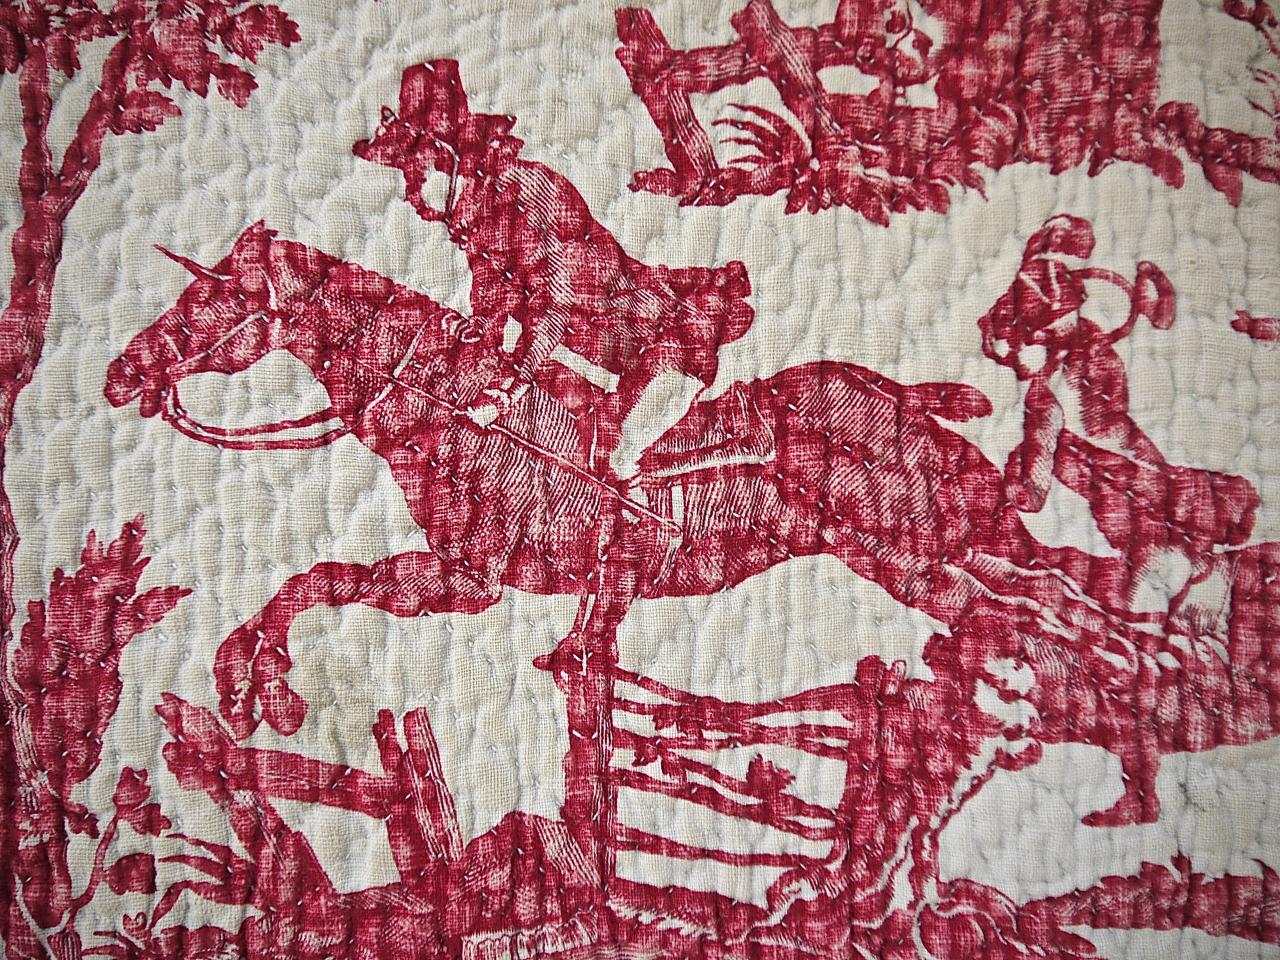 A rarely seen French Toile de Nantes called 'La Chasse du Sanglier' or the Boar Hunt from the Favre Petotpierre et Cie factory. There are scenes with falcons, horses jumping and running dogs and some ladies and gentleman. A soft raspberry red color,